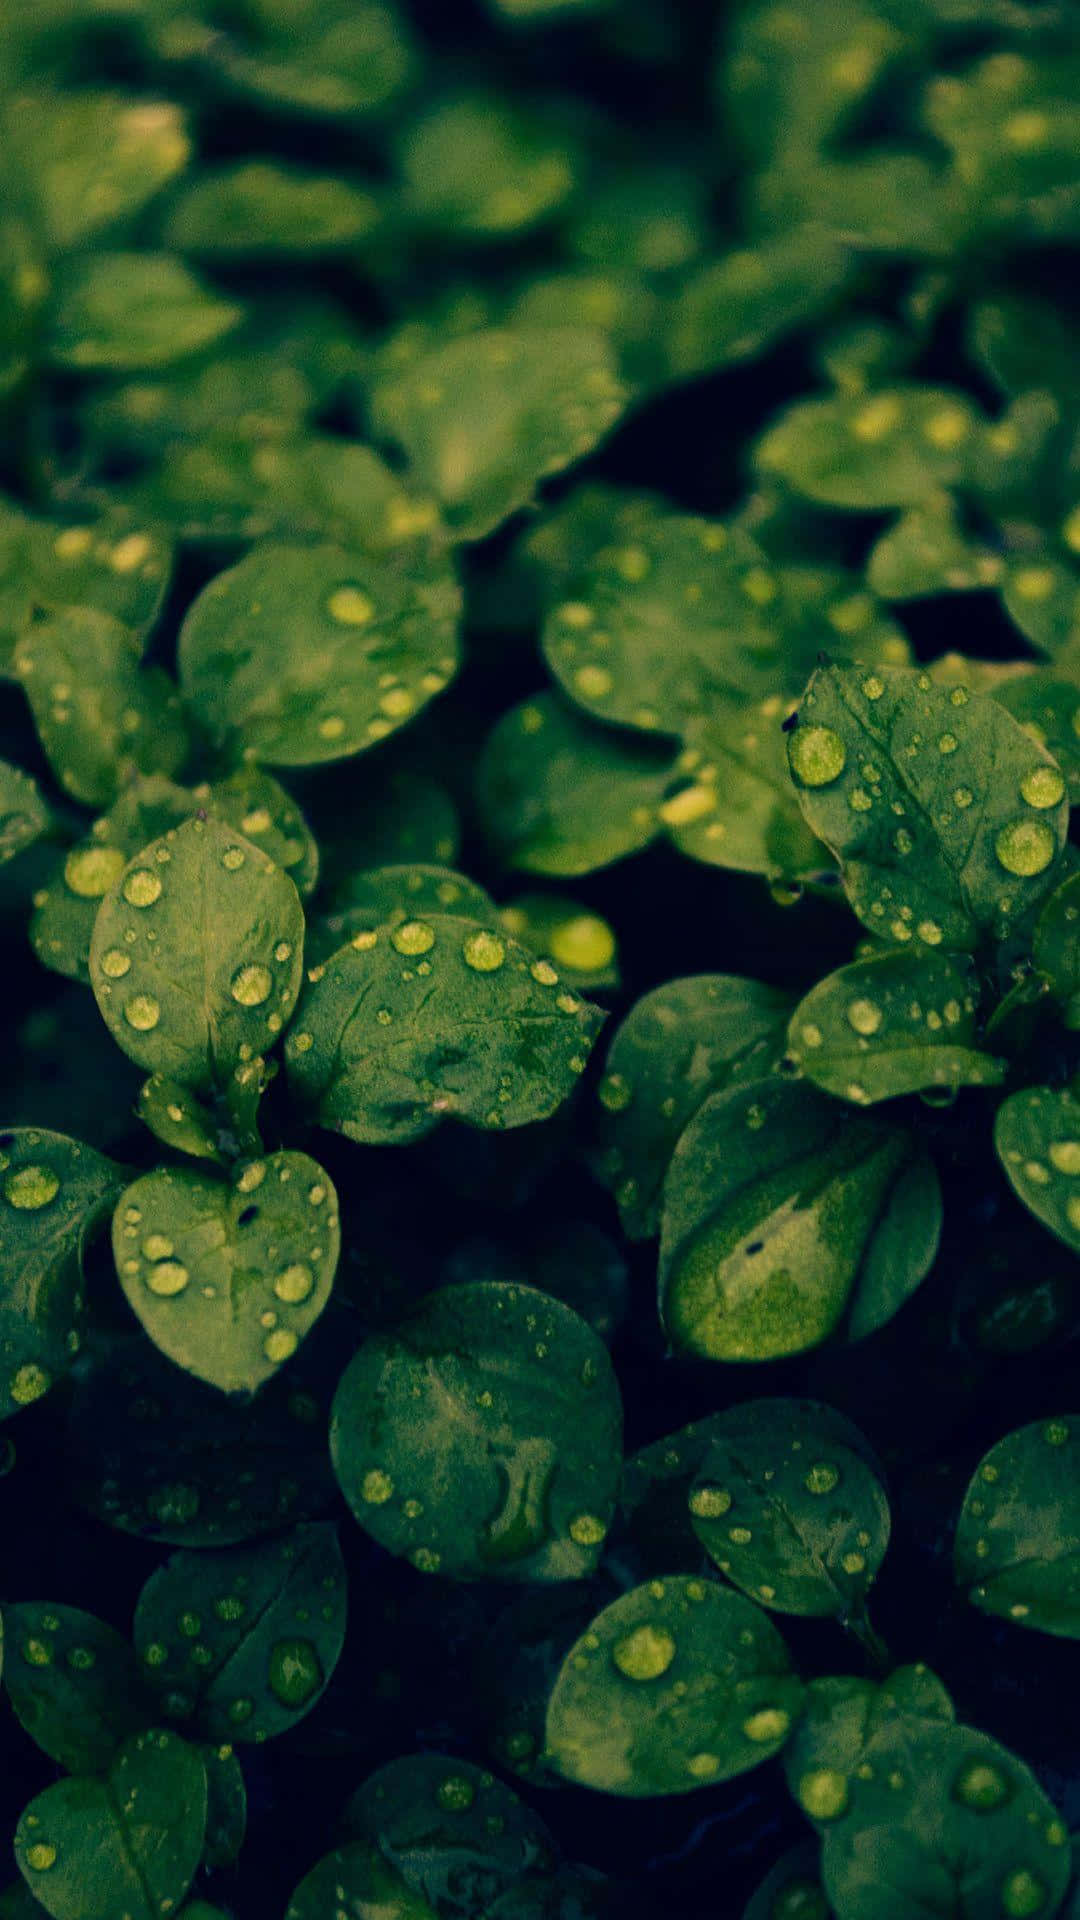 Green Leaves With Water Droplets On Them